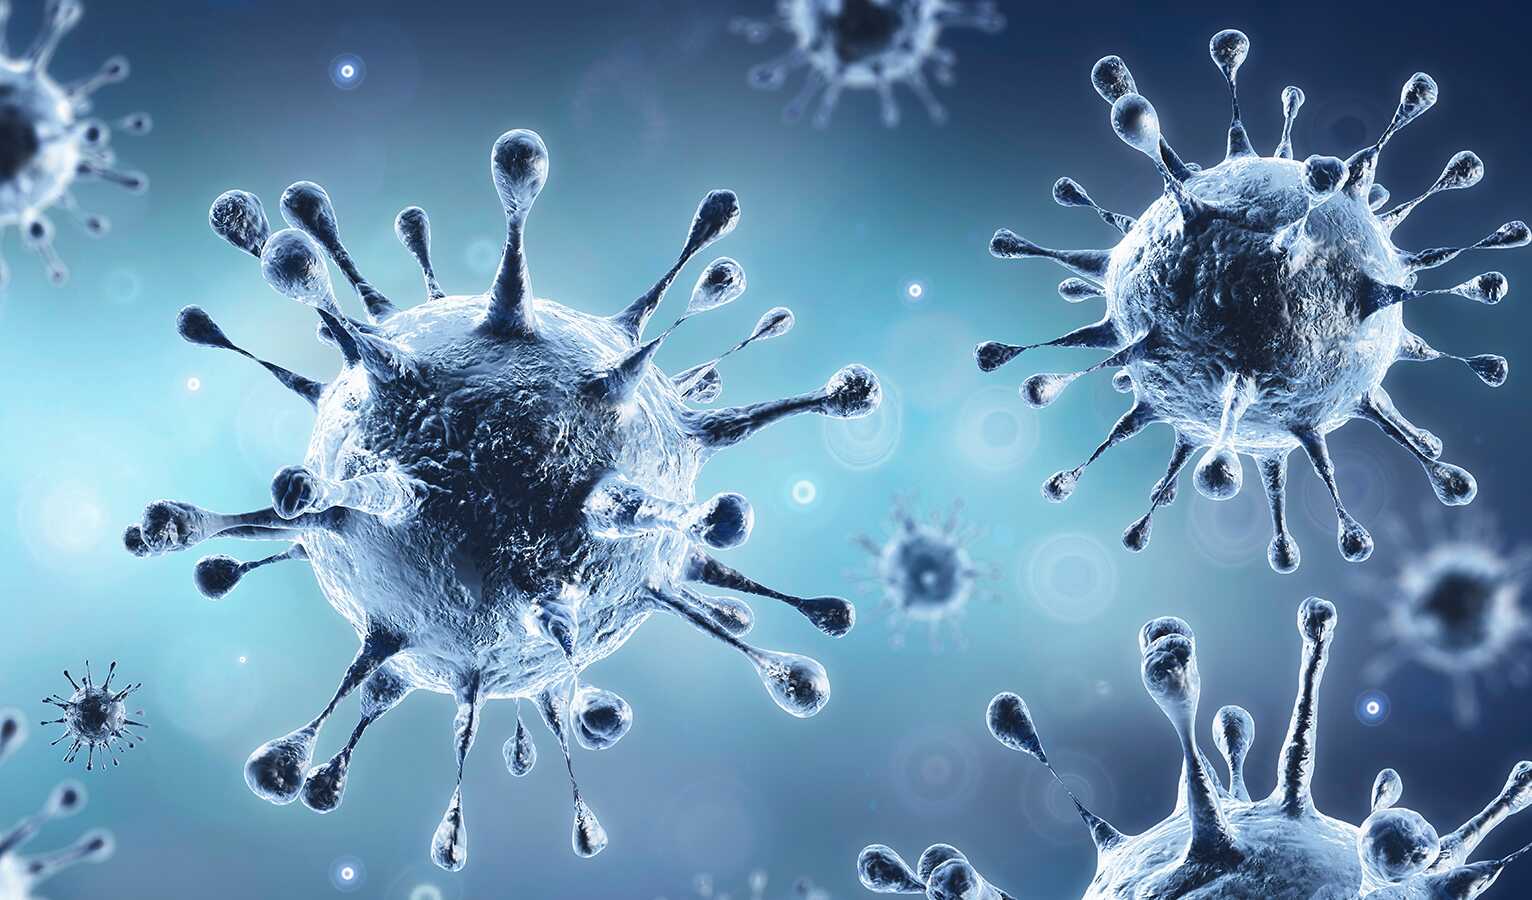 Covid strain first detected in India to be called Delta variant: WHO